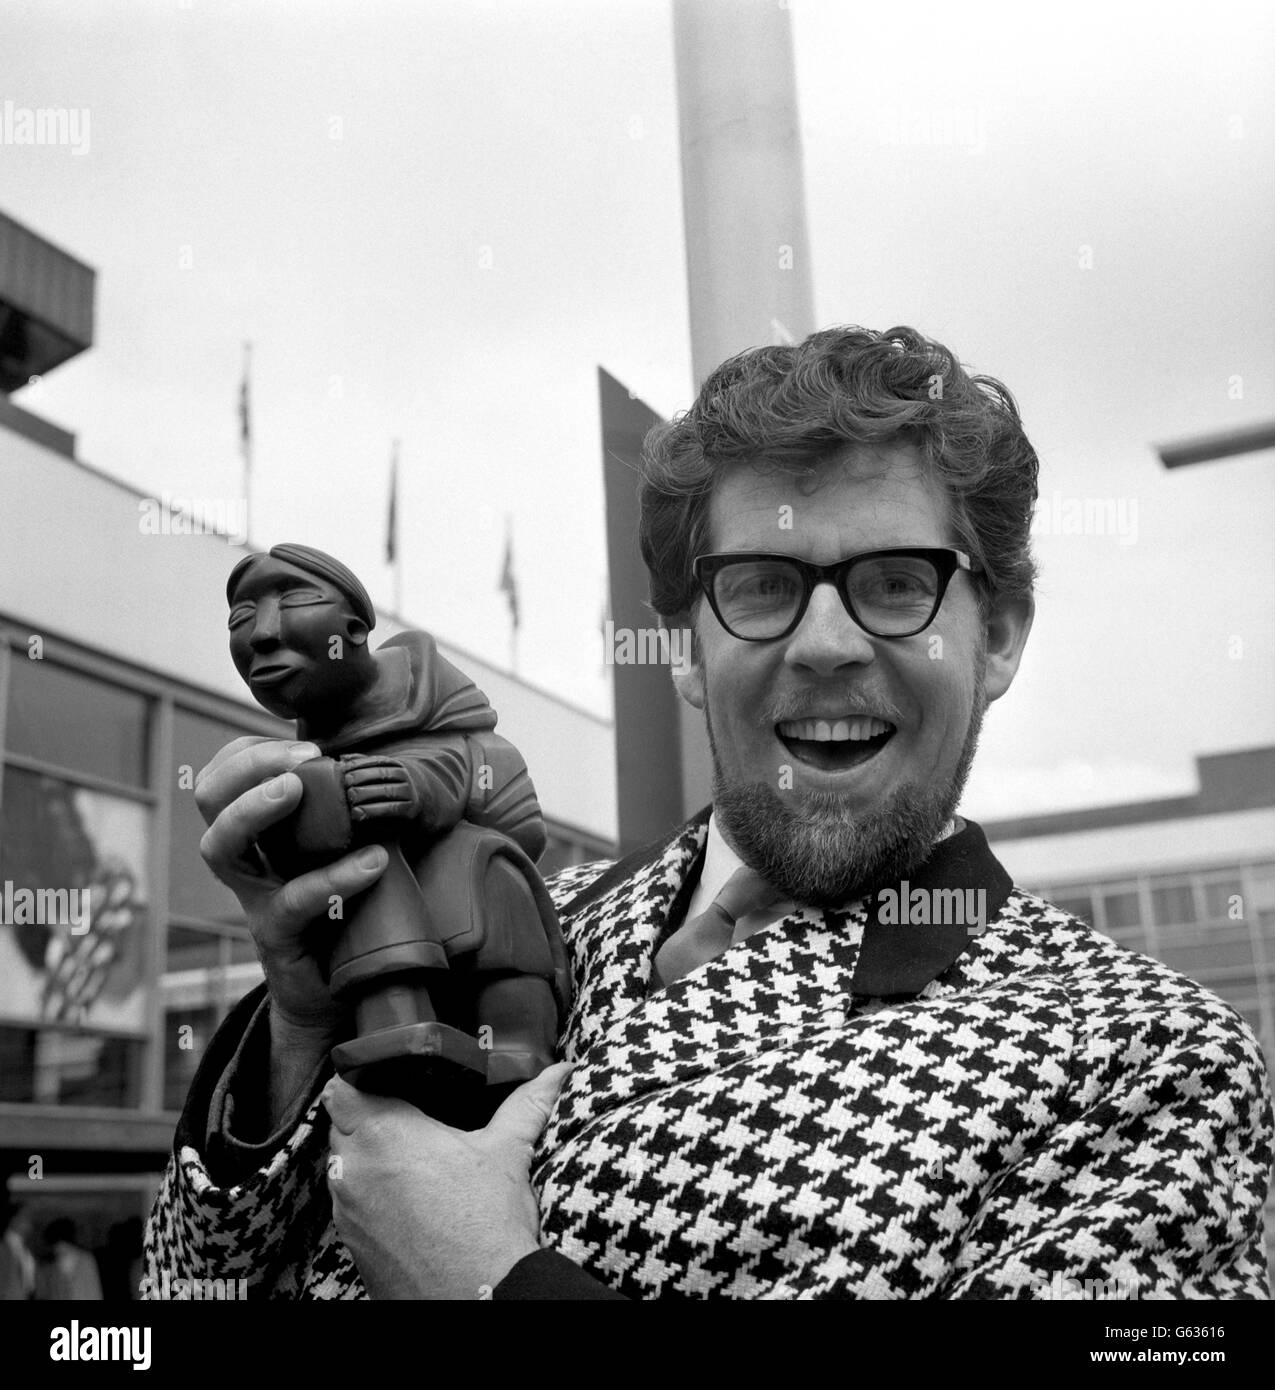 Australian entertainer Rolf Harris at Heathrow Airport. He's arrived back from Canada, bringing an Eskimo doll from Montreal's Expo '67. Stock Photo